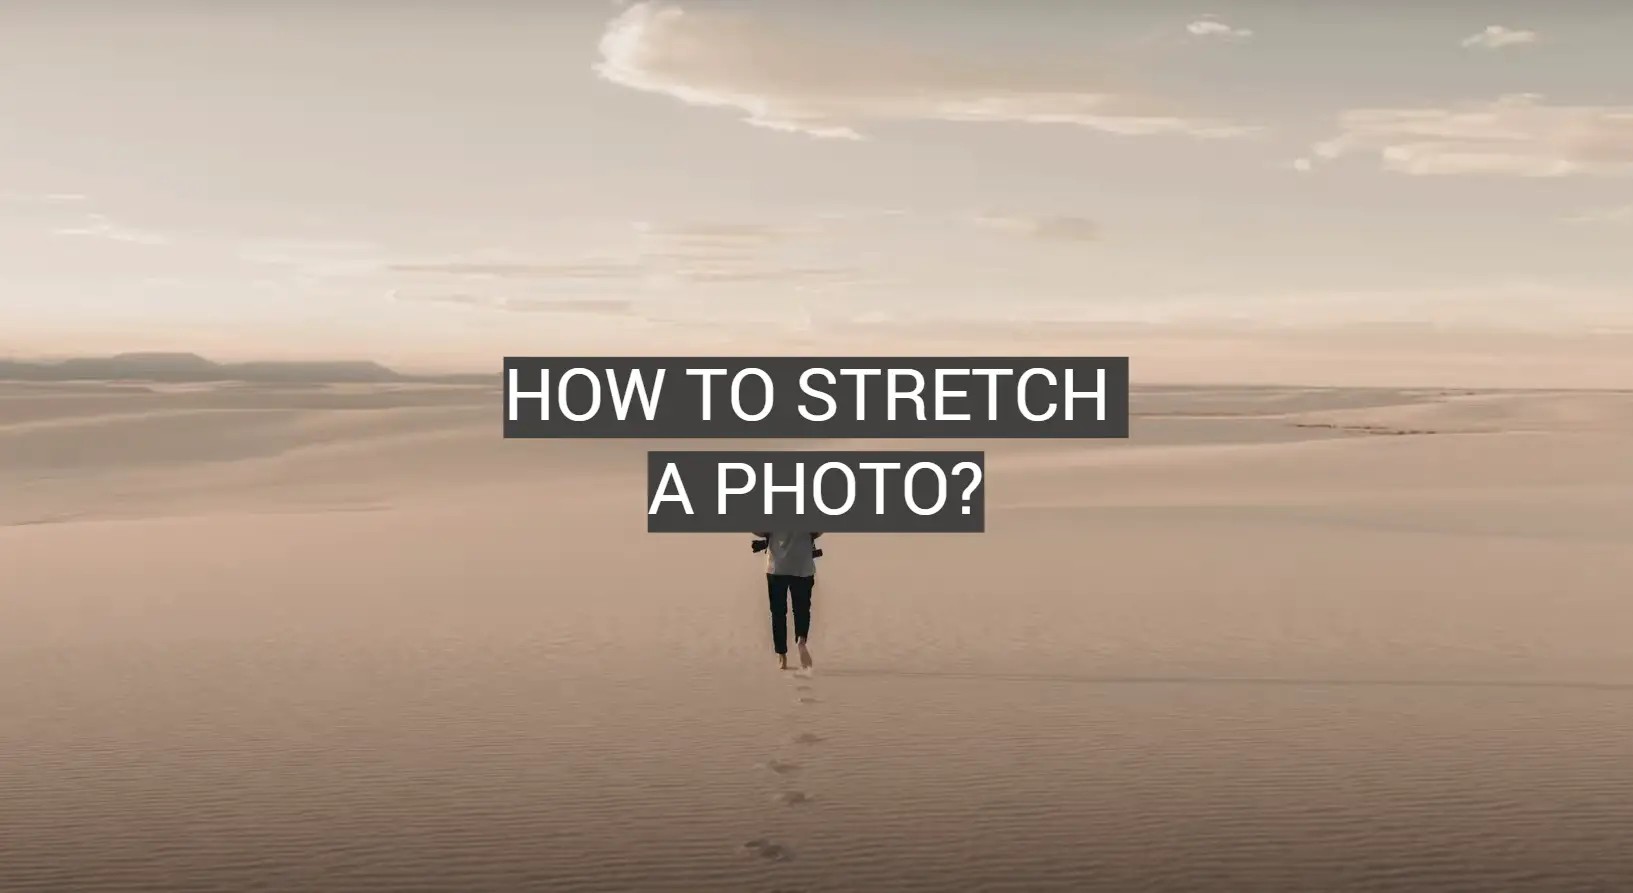 How to Stretch a Photo?